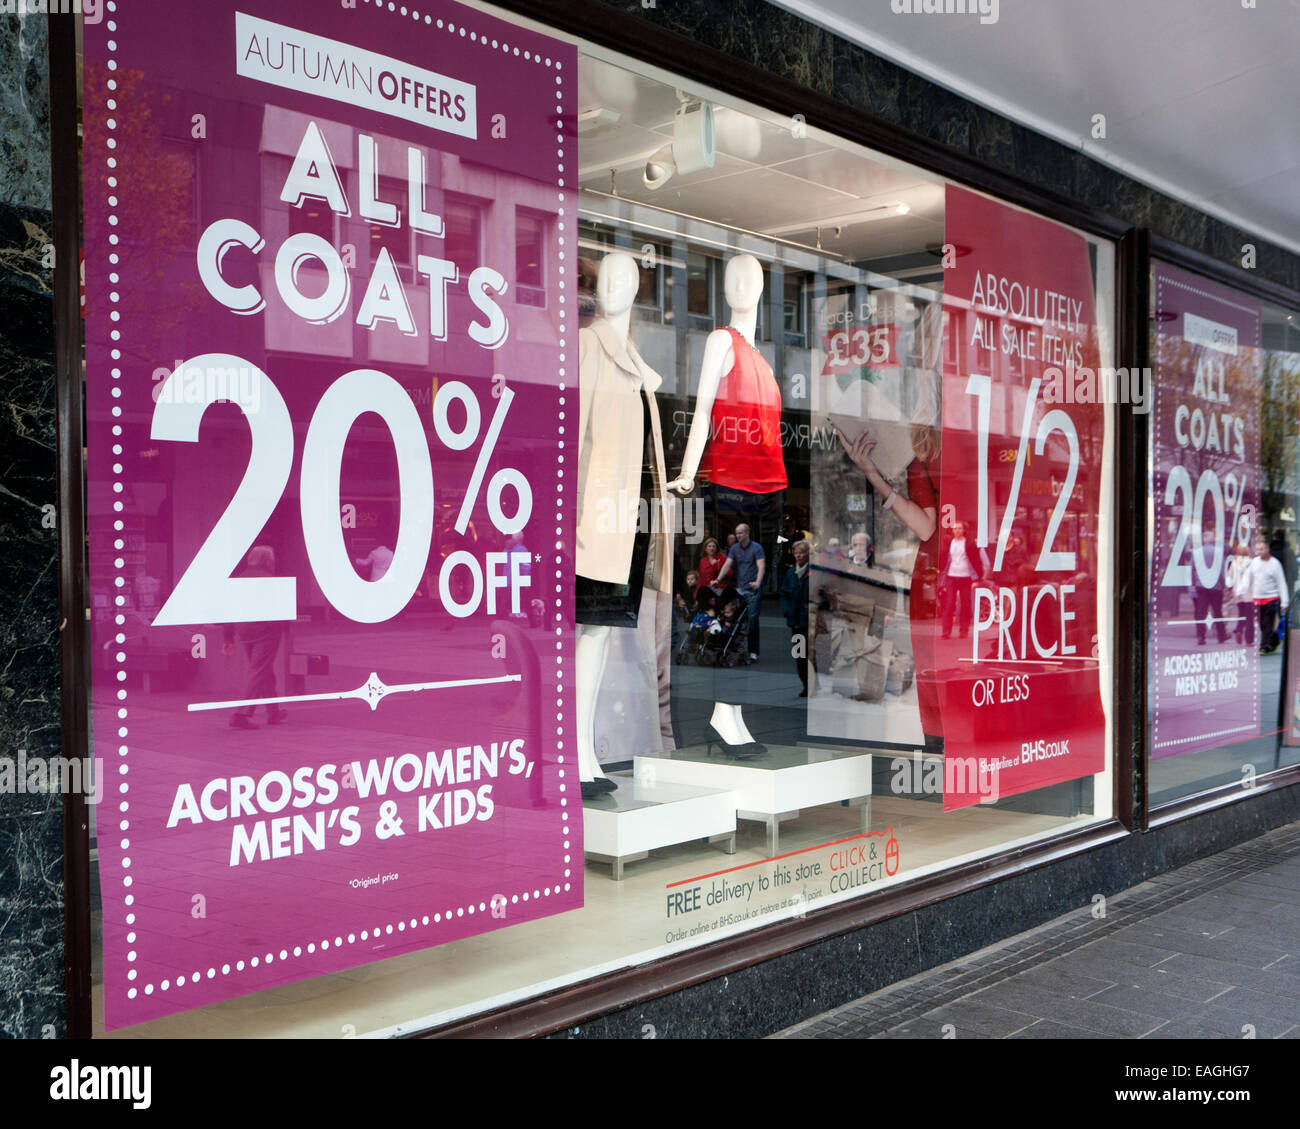 shops-and-stores-offering-discounts-and-percent-off-to-entice-customers